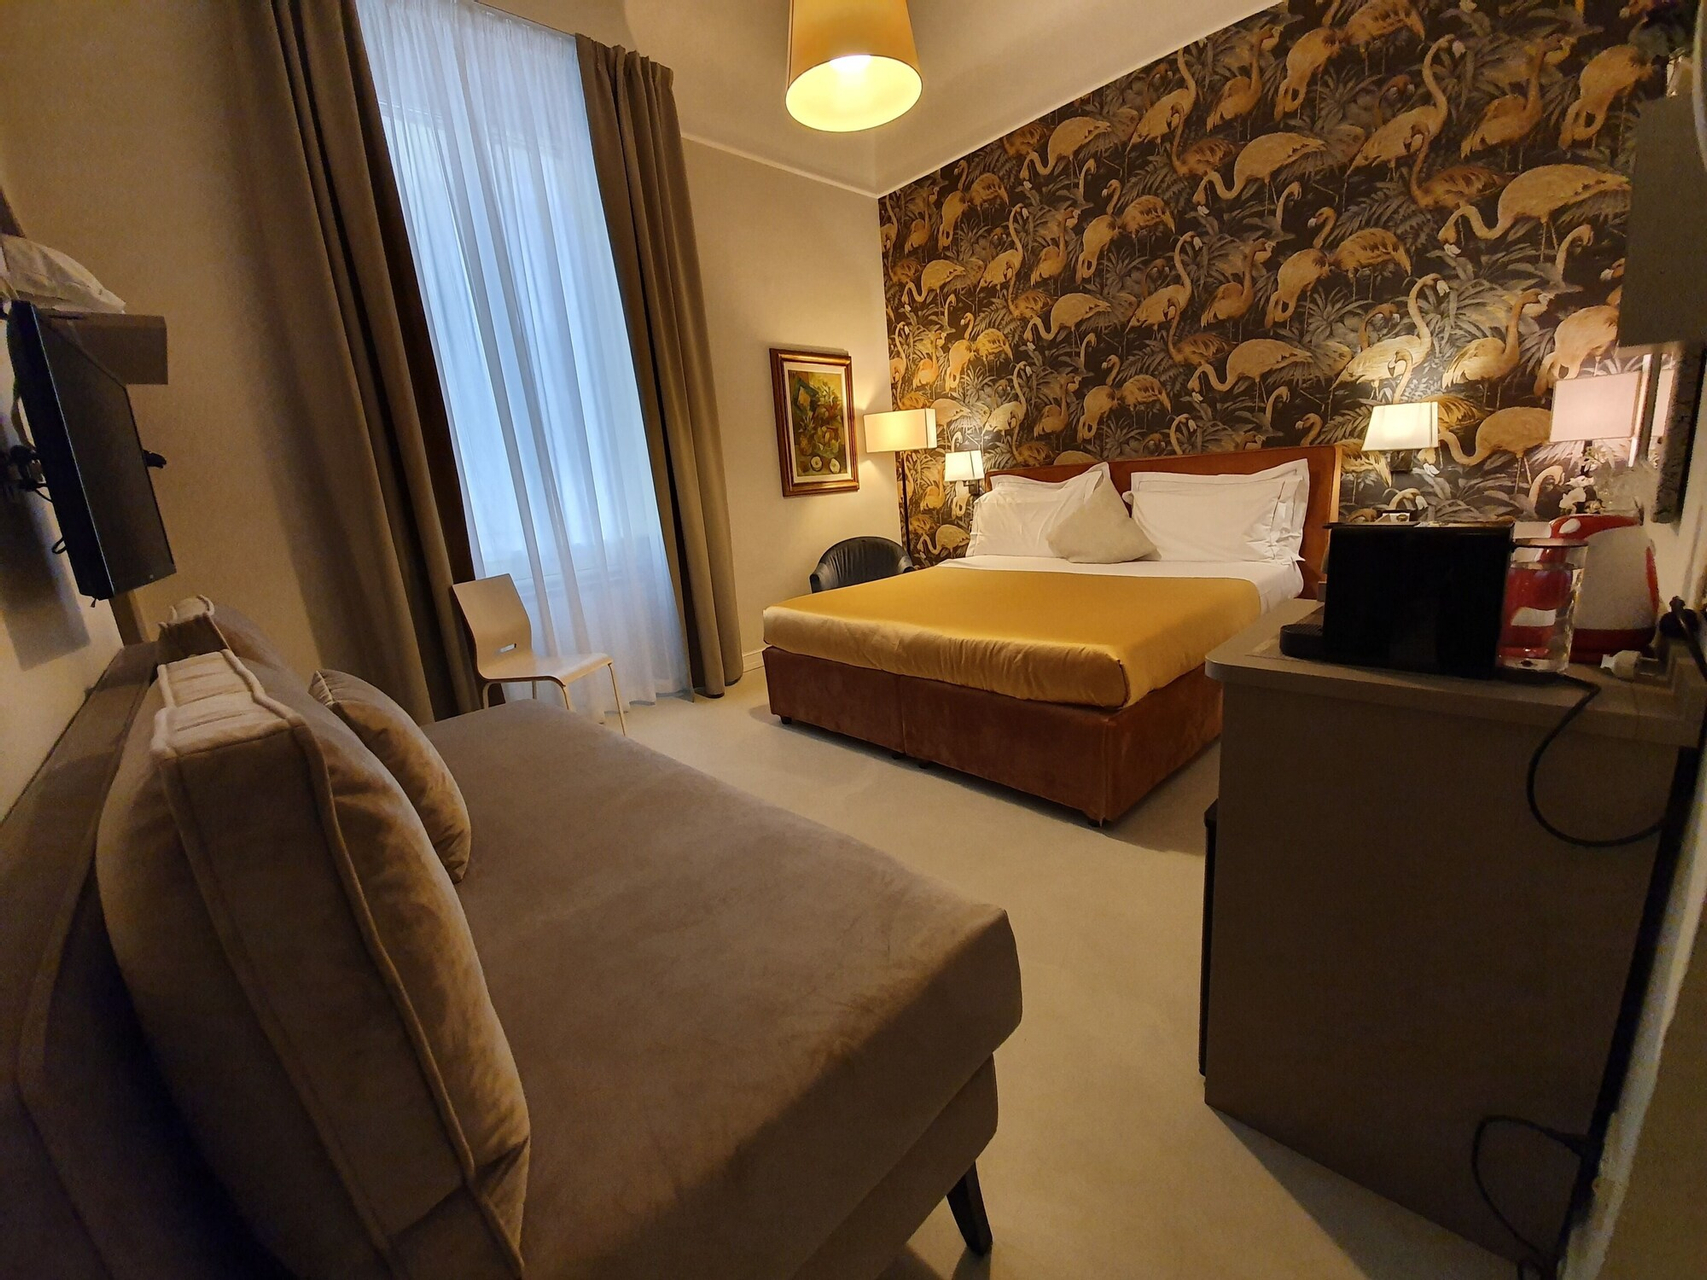 Room 1, Hotel Axial, Florence